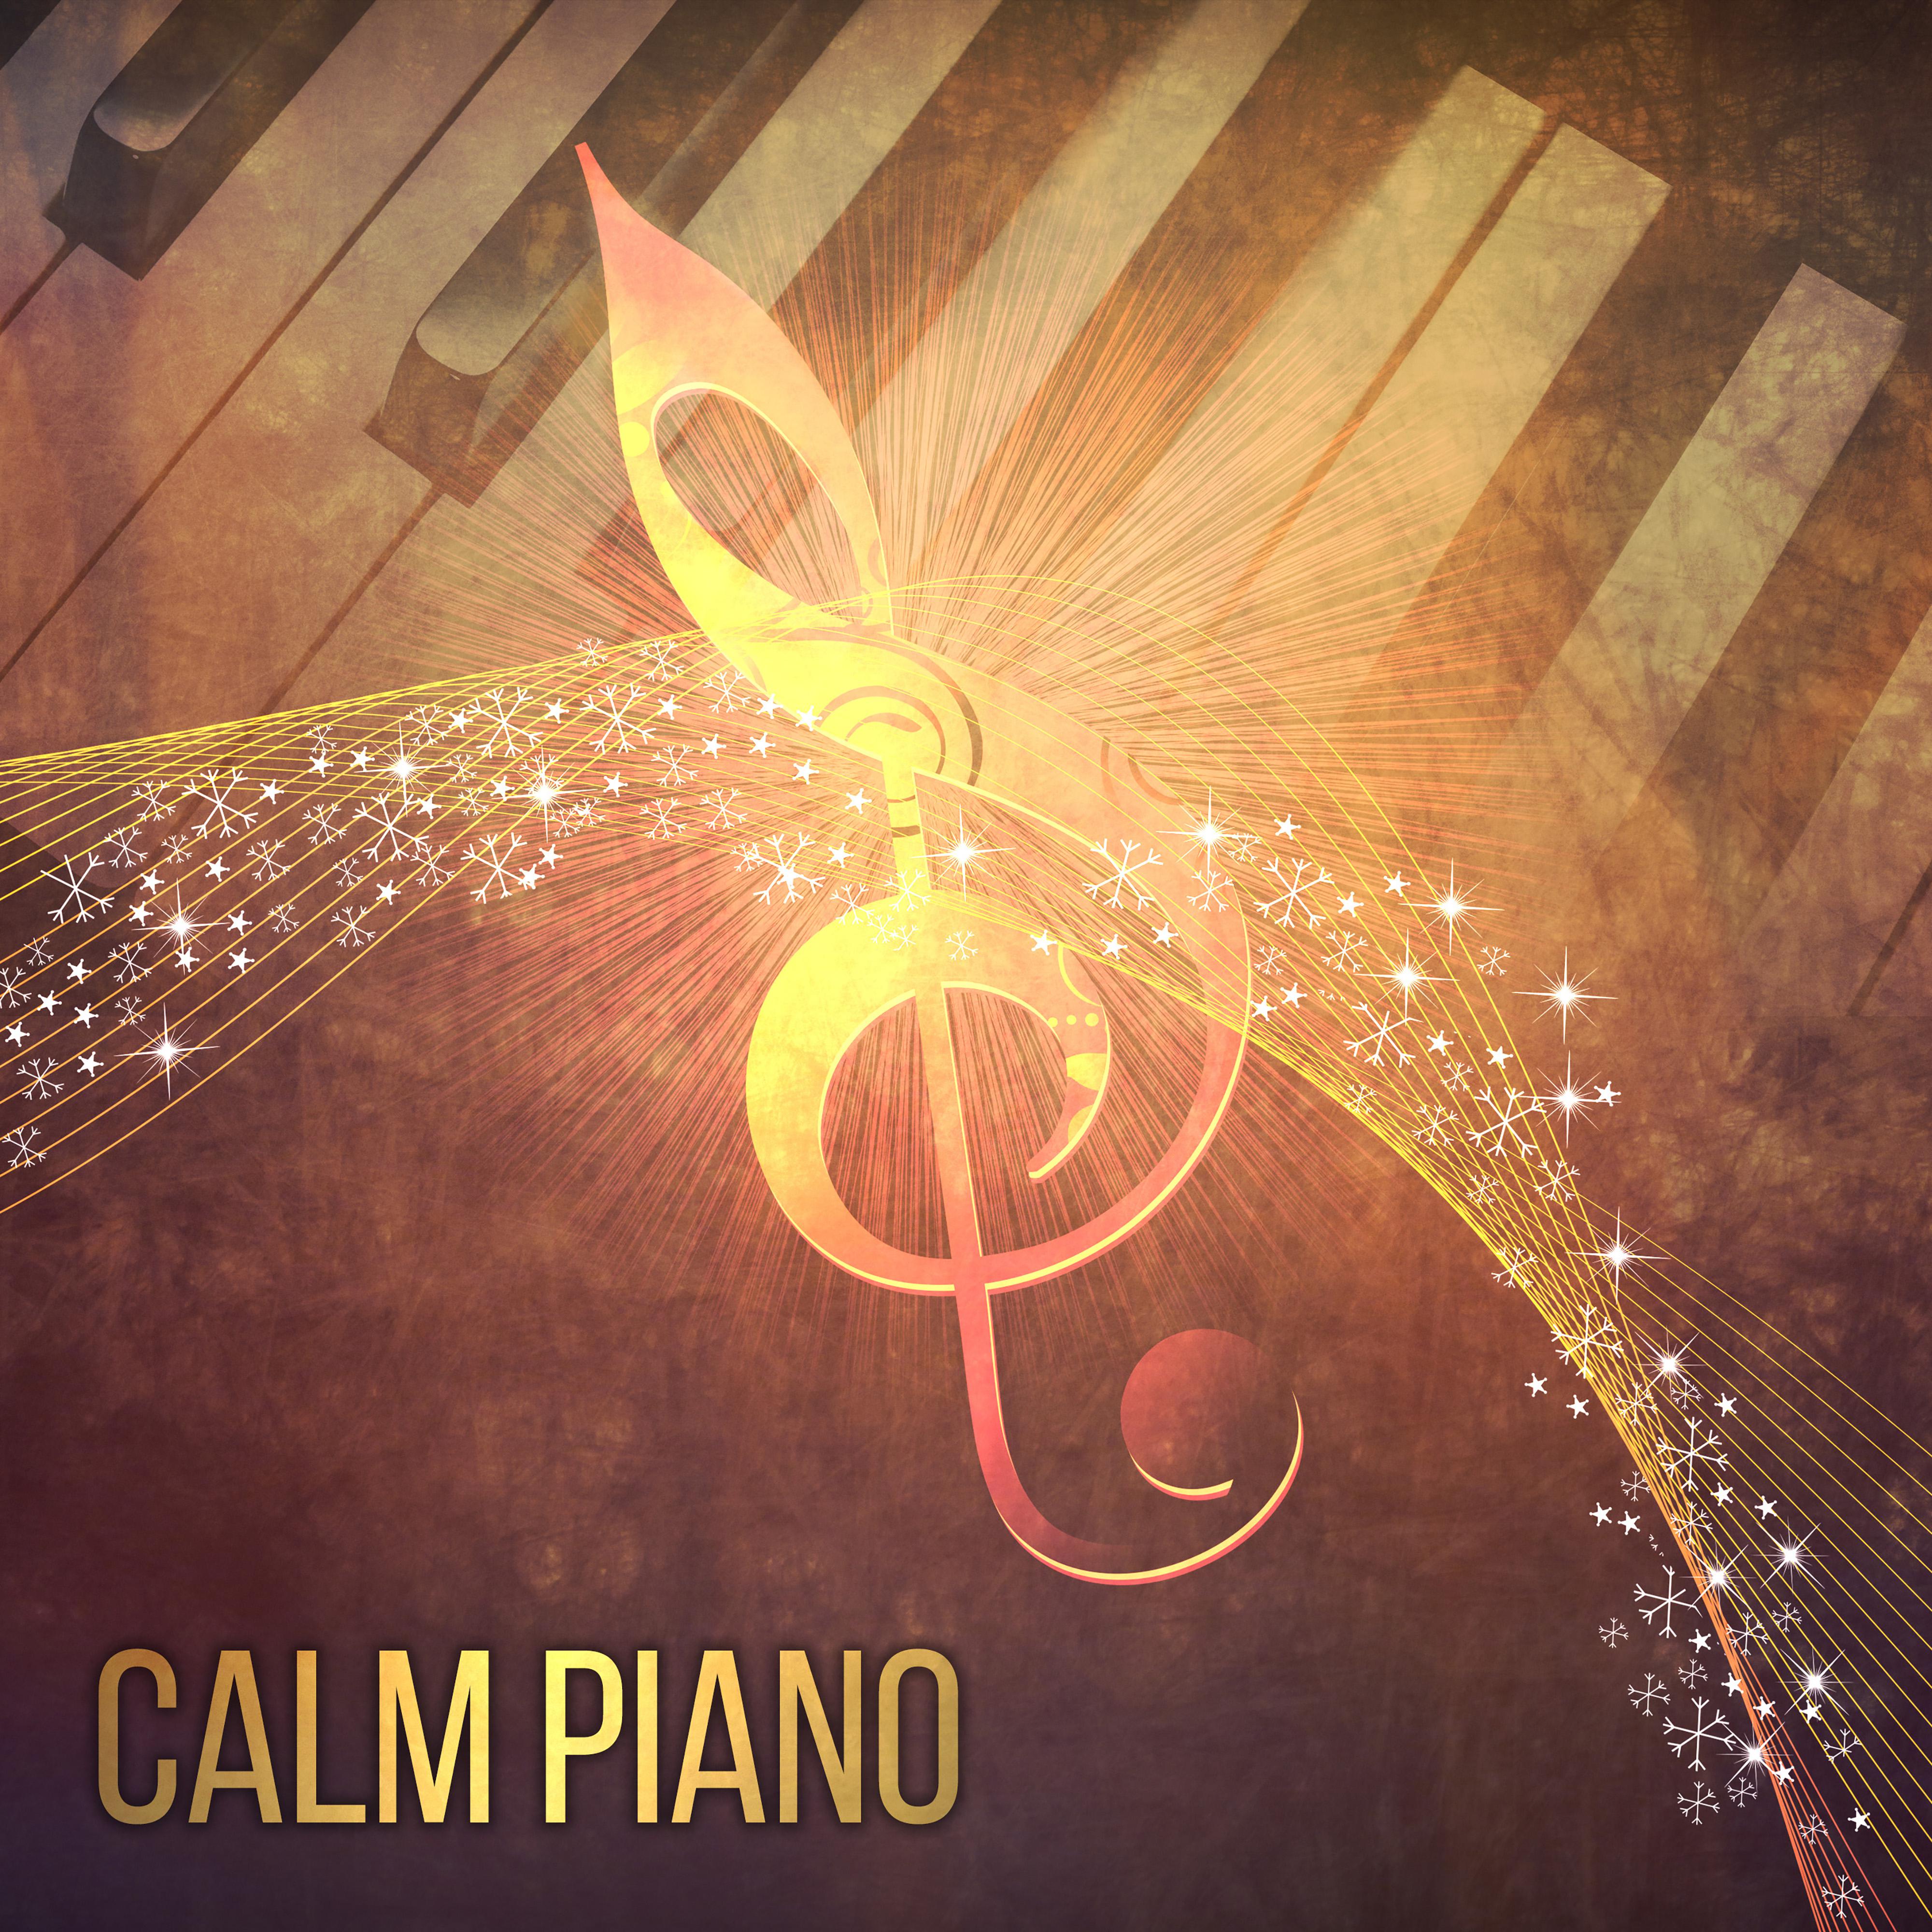 Calm Piano  Mellow Jazz Instrumental, Music for Dinner, Relax Time, Peaceful Piano